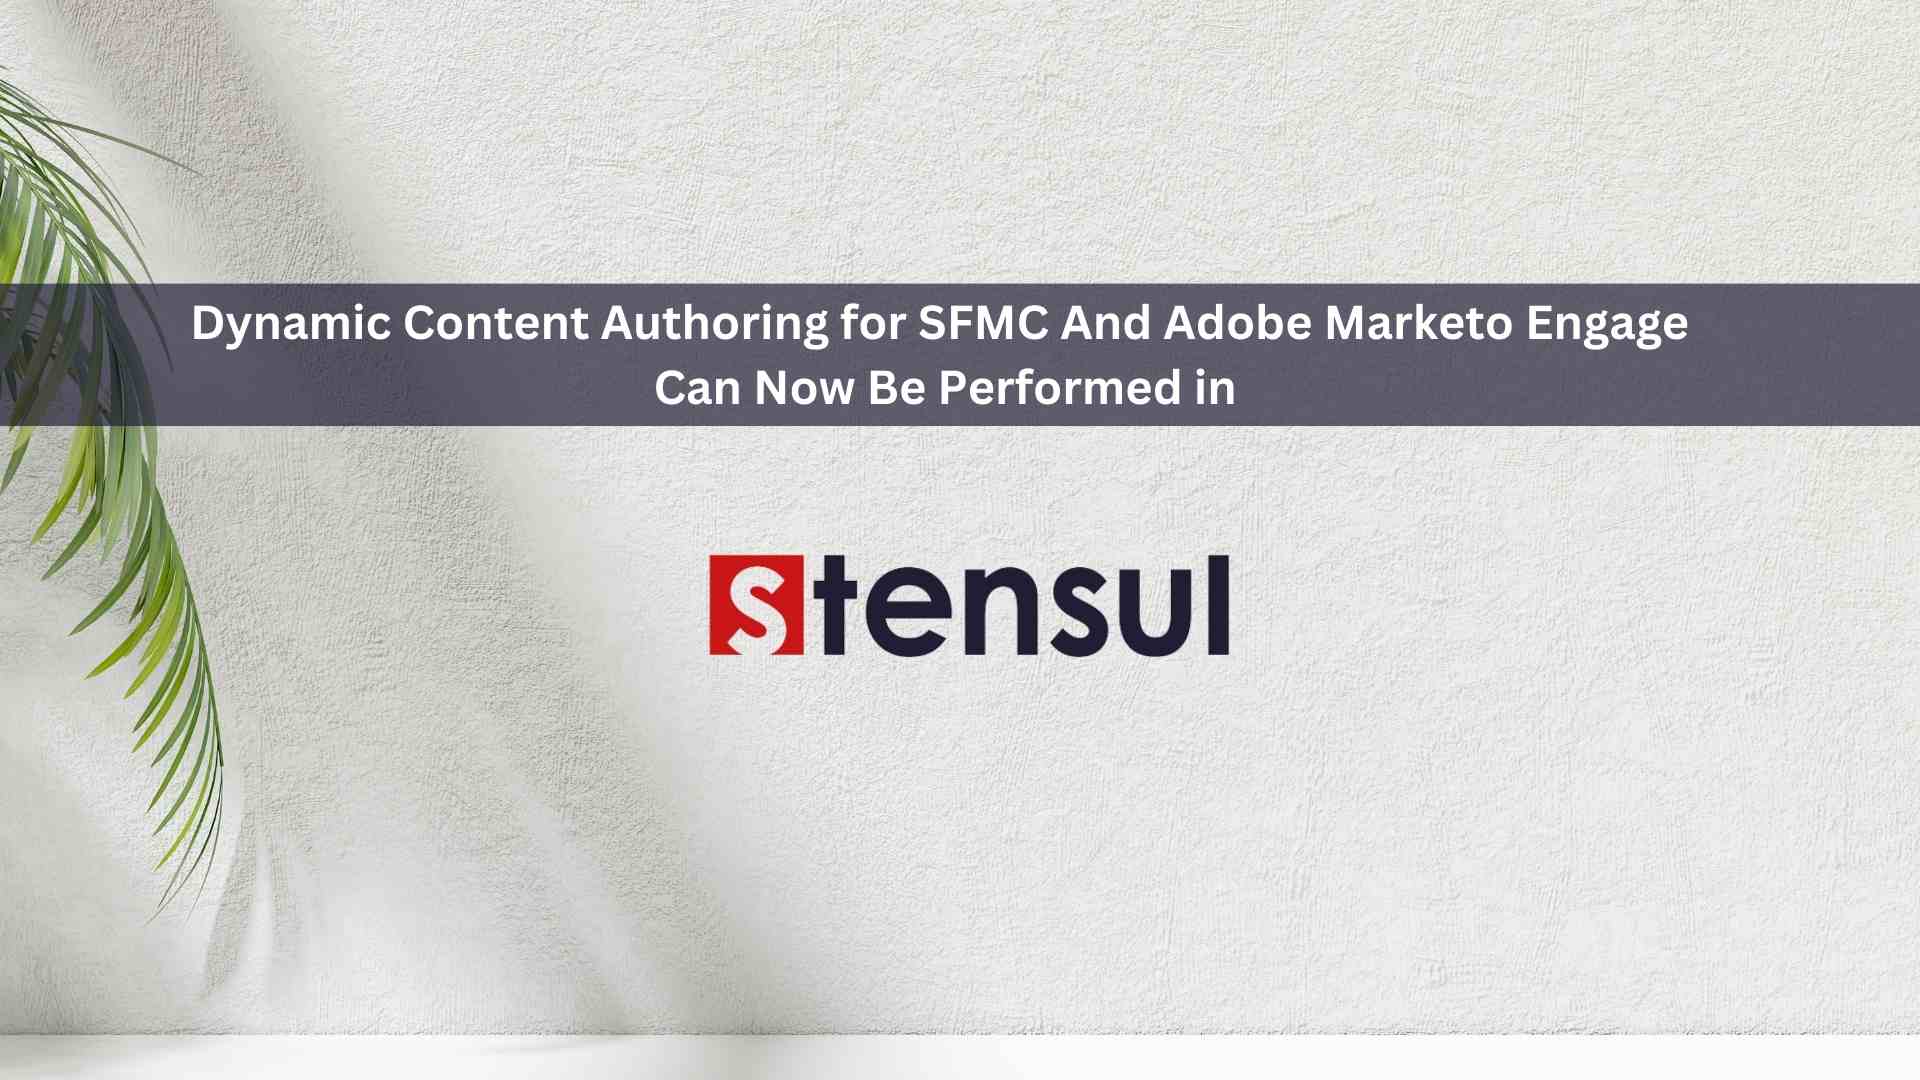 Stensul Adds No-code Dynamic Authoring for Salesforce Marketing Cloud and Marketo to its Email and Landing Page Creation Platform